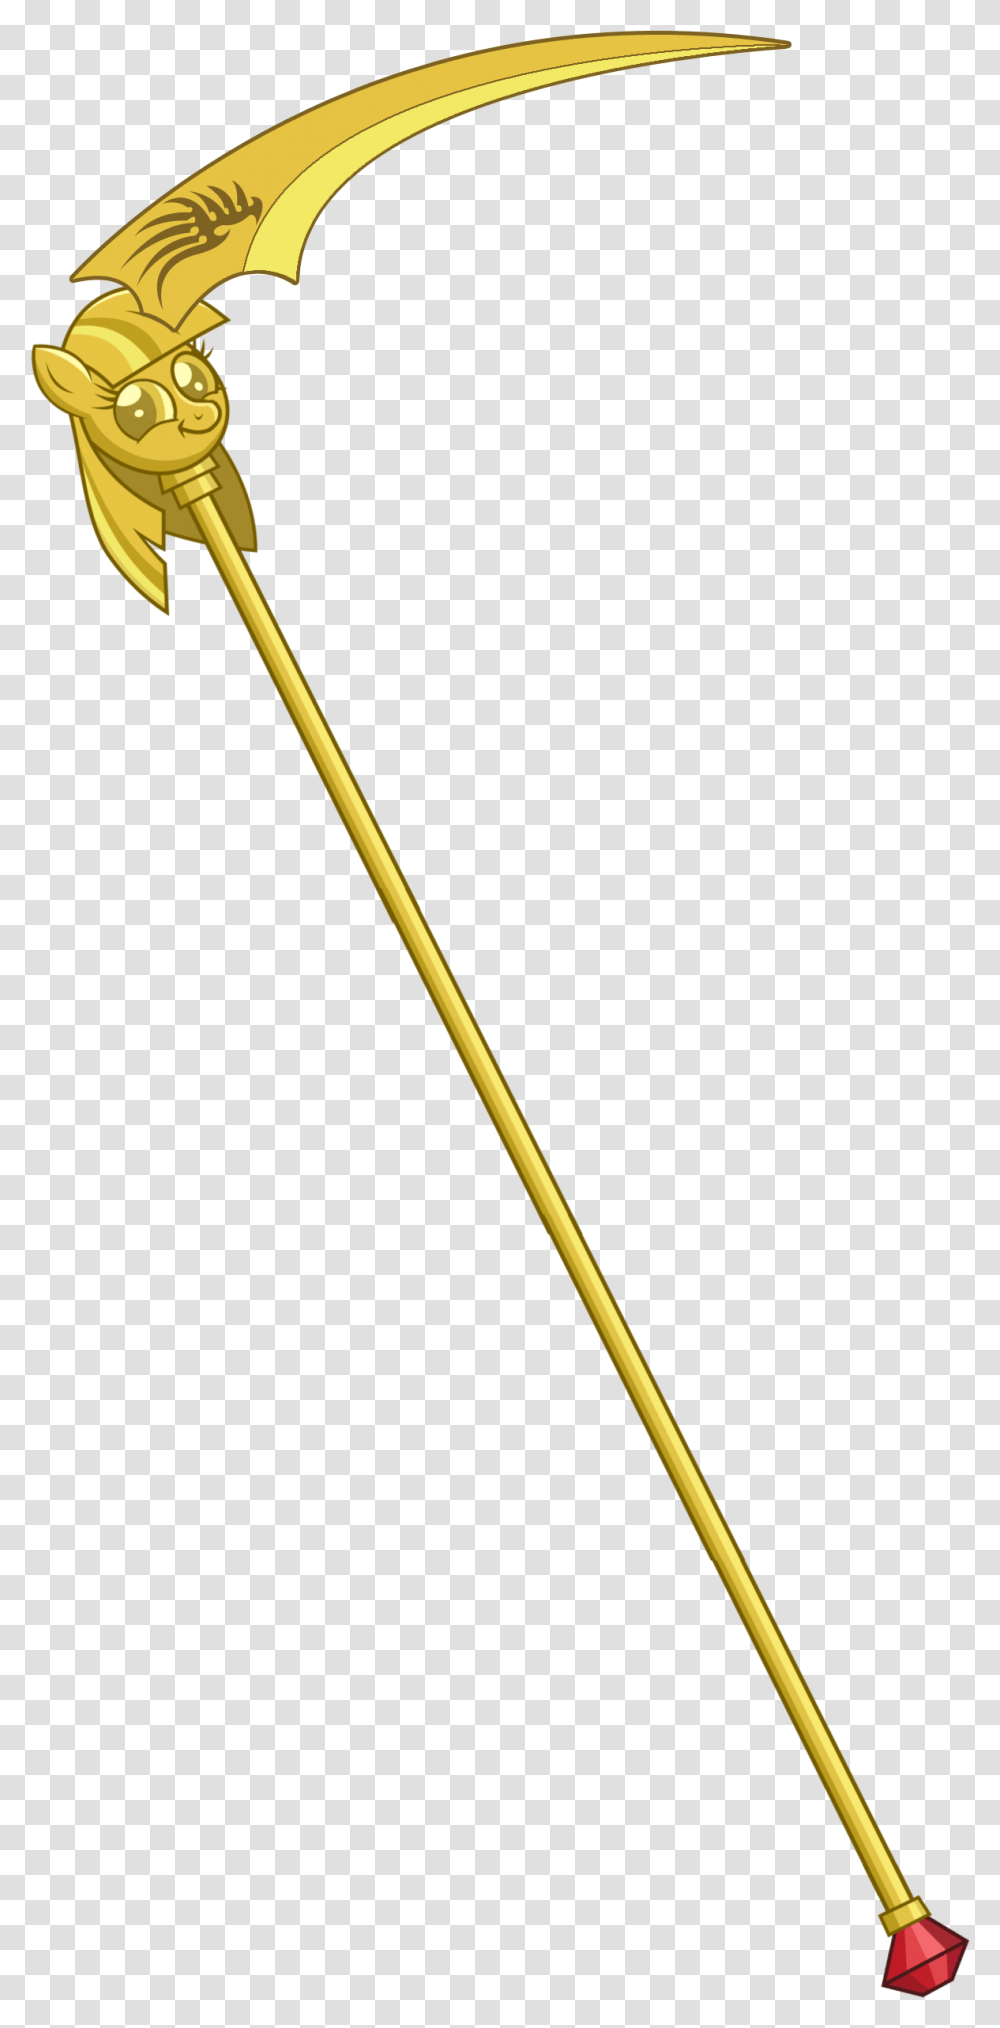 Cold Weapon, Spear, Weaponry, Trident, Emblem Transparent Png